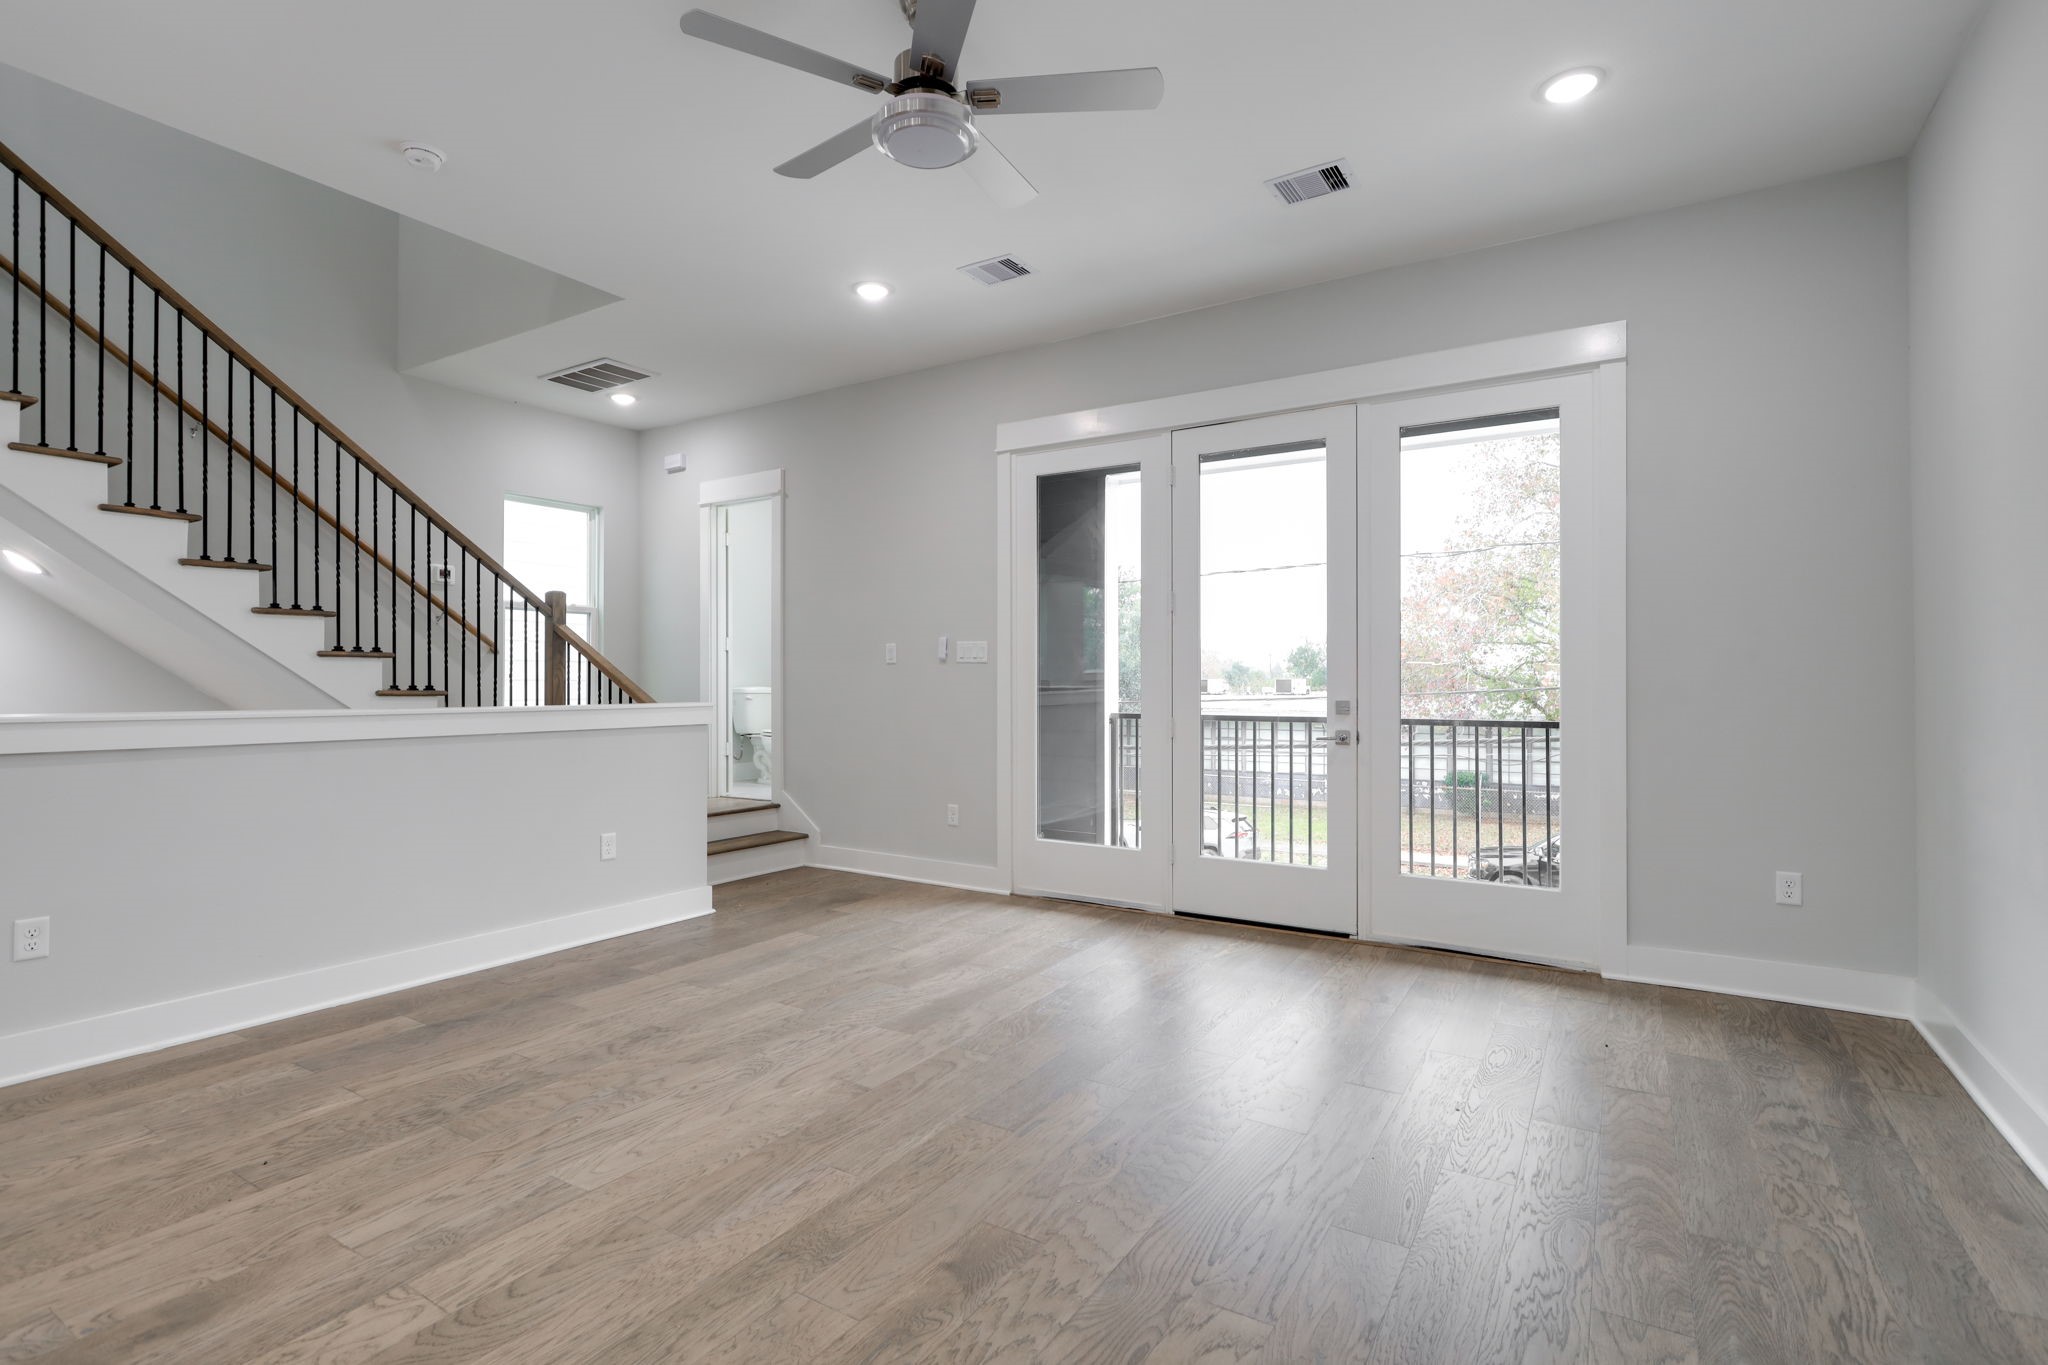 The spacious living room leads out to the balcony overlooking the quiet neighborhood.